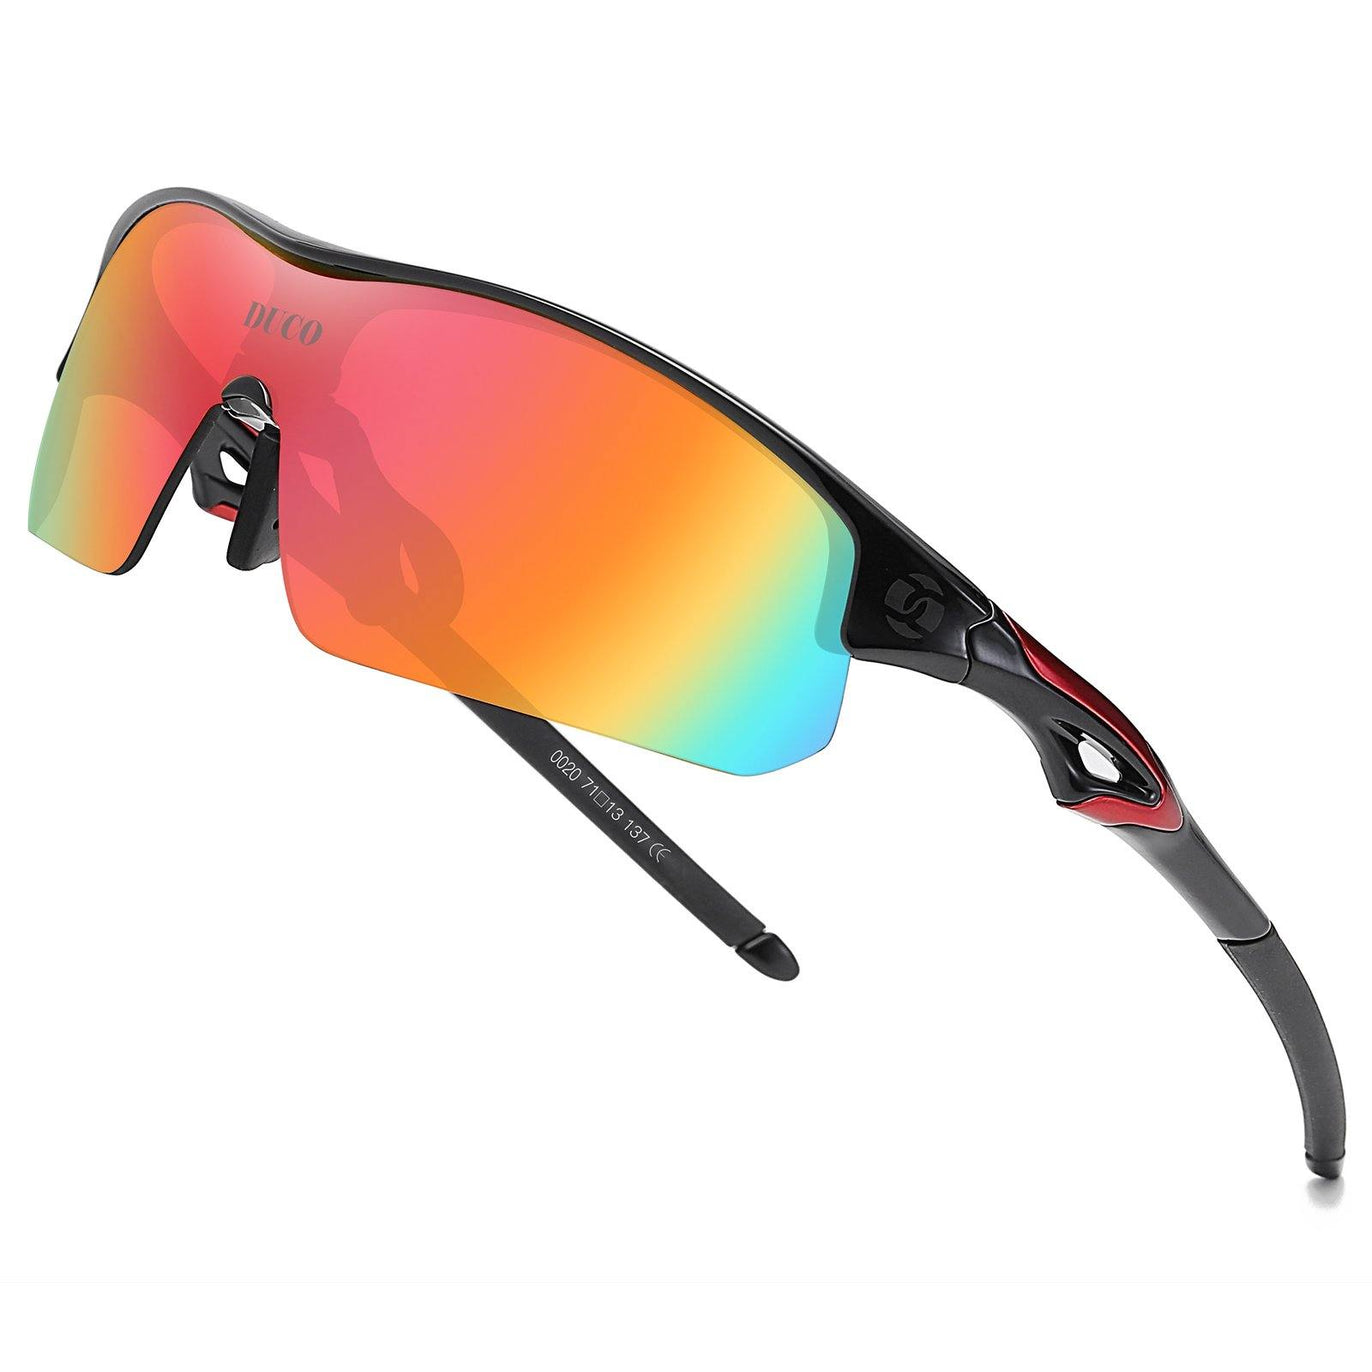 Sports Lightweight Goggles, Multicolor Coating Outdoor Cycling